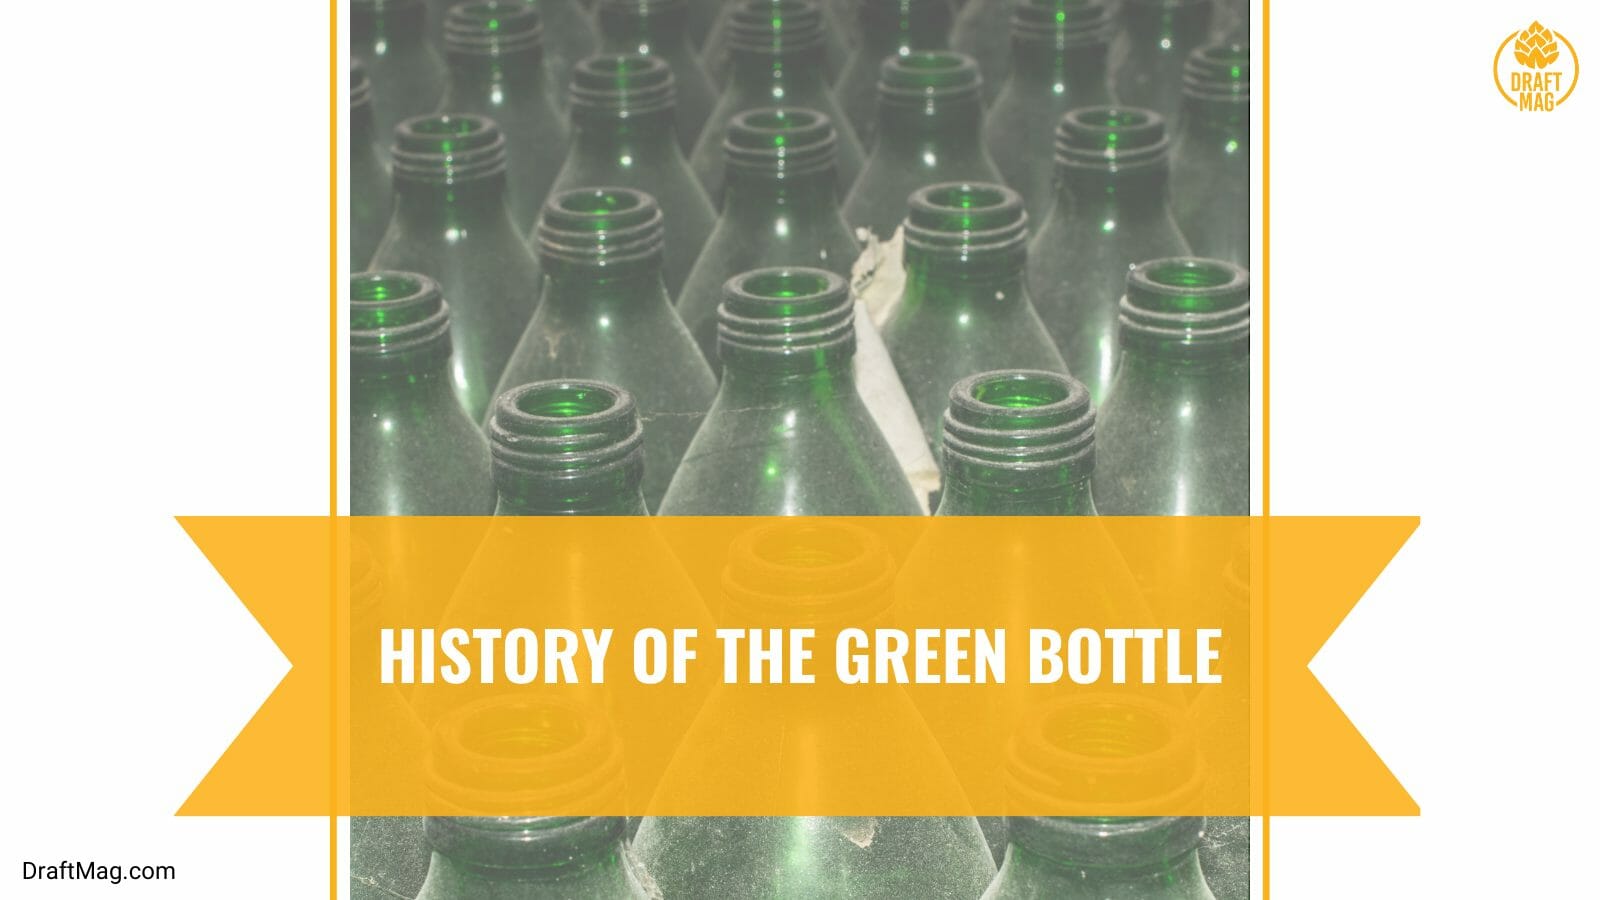 History of the green bottle